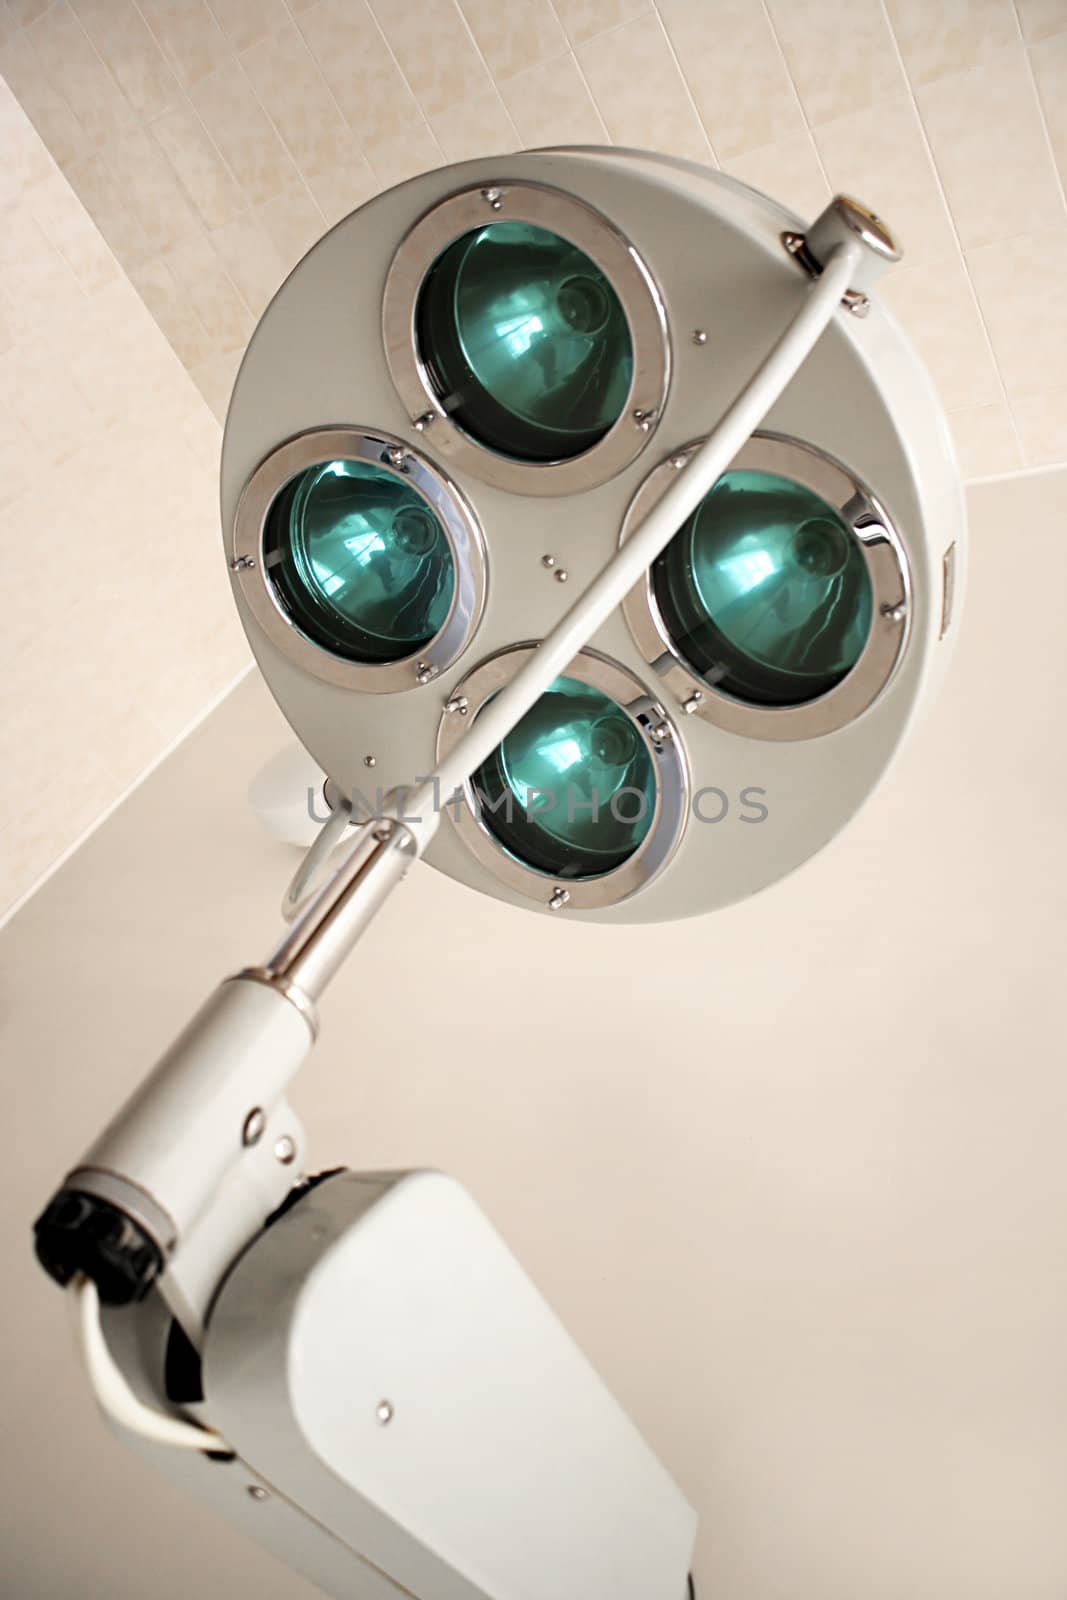 New and modern lamp in a surgical room